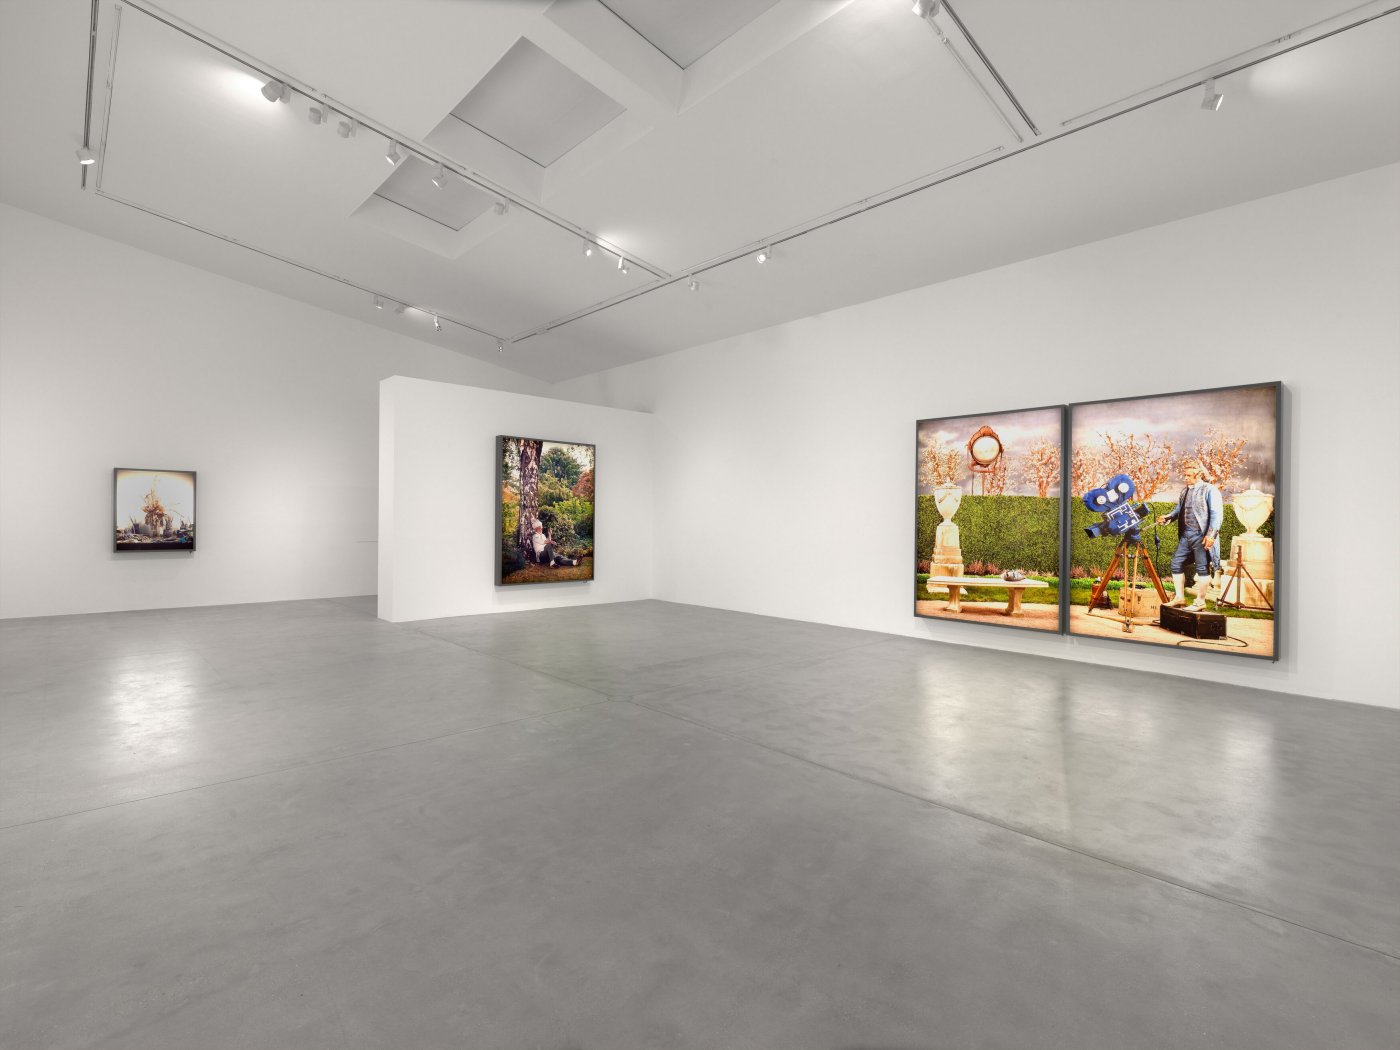 Installation image for Rodney Graham. Getting it Together in the Country, at Hauser & Wirth